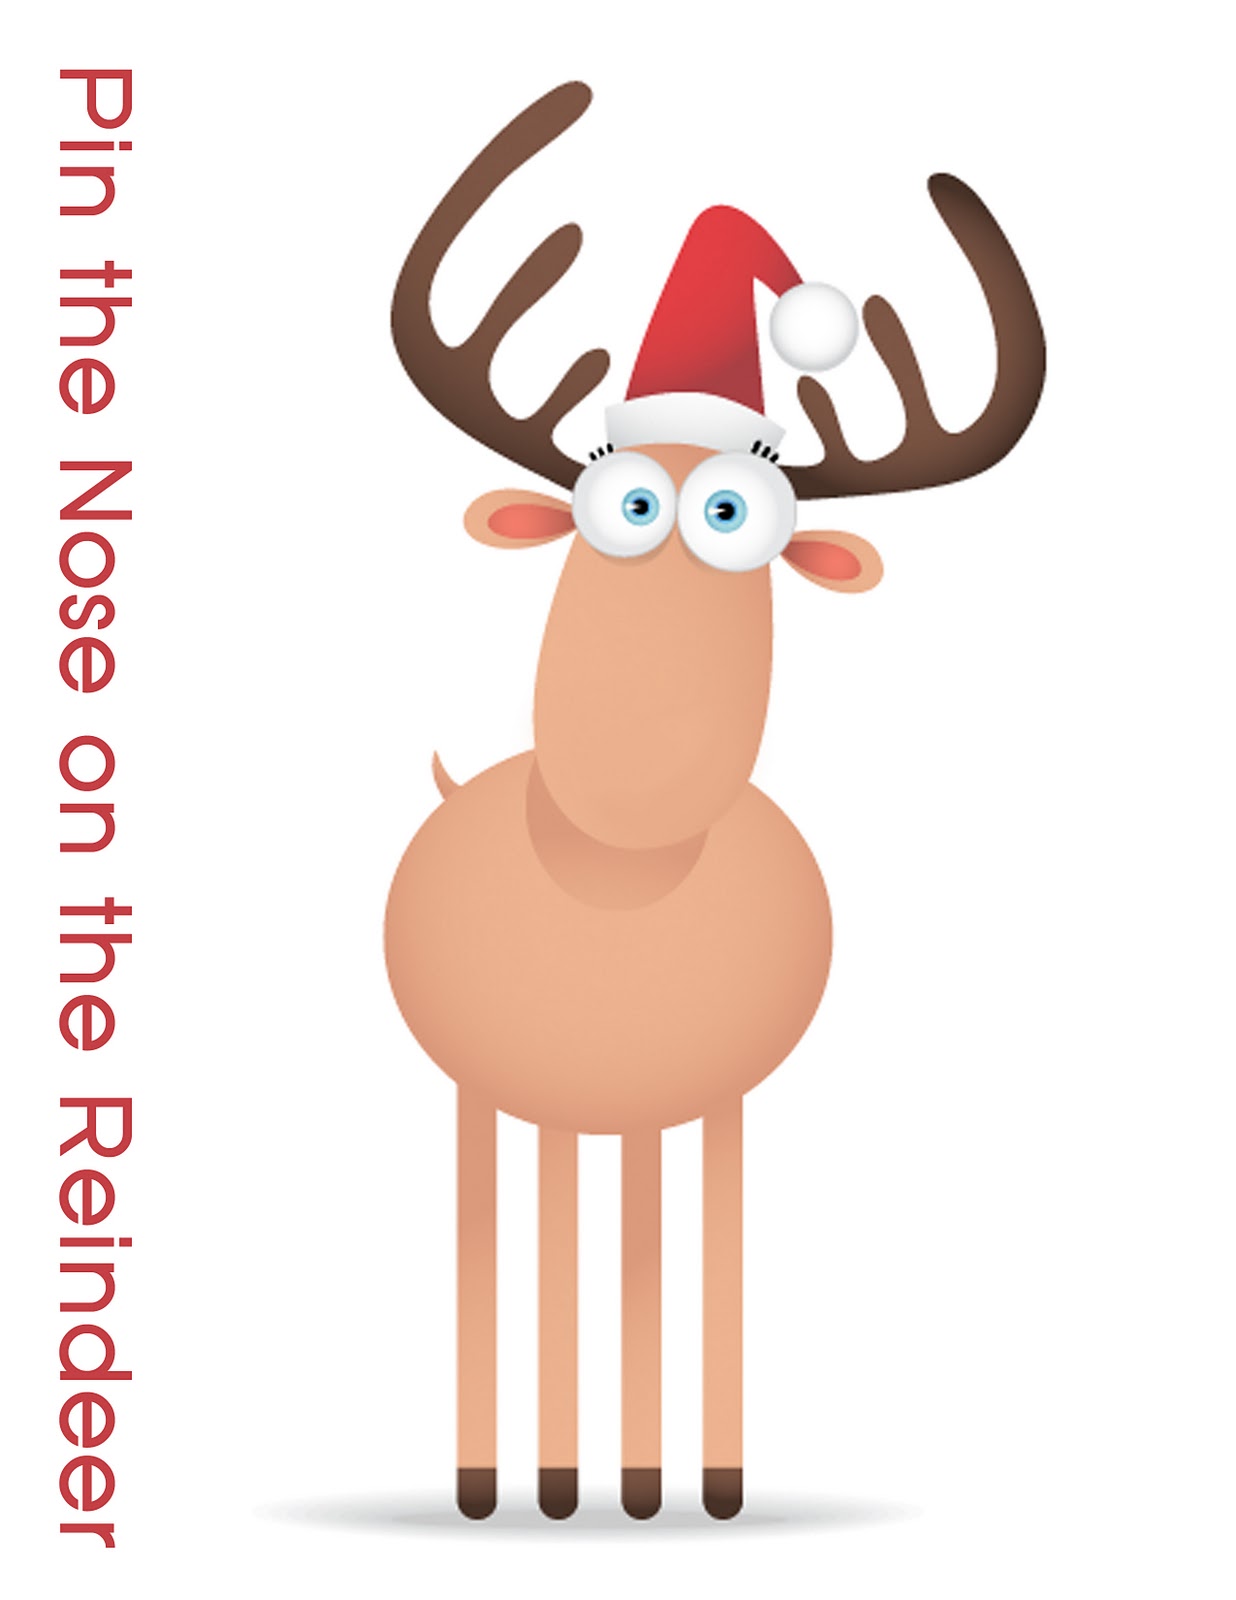 pin-the-nose-on-the-reindeer-printable-that-are-slobbery-stone-website